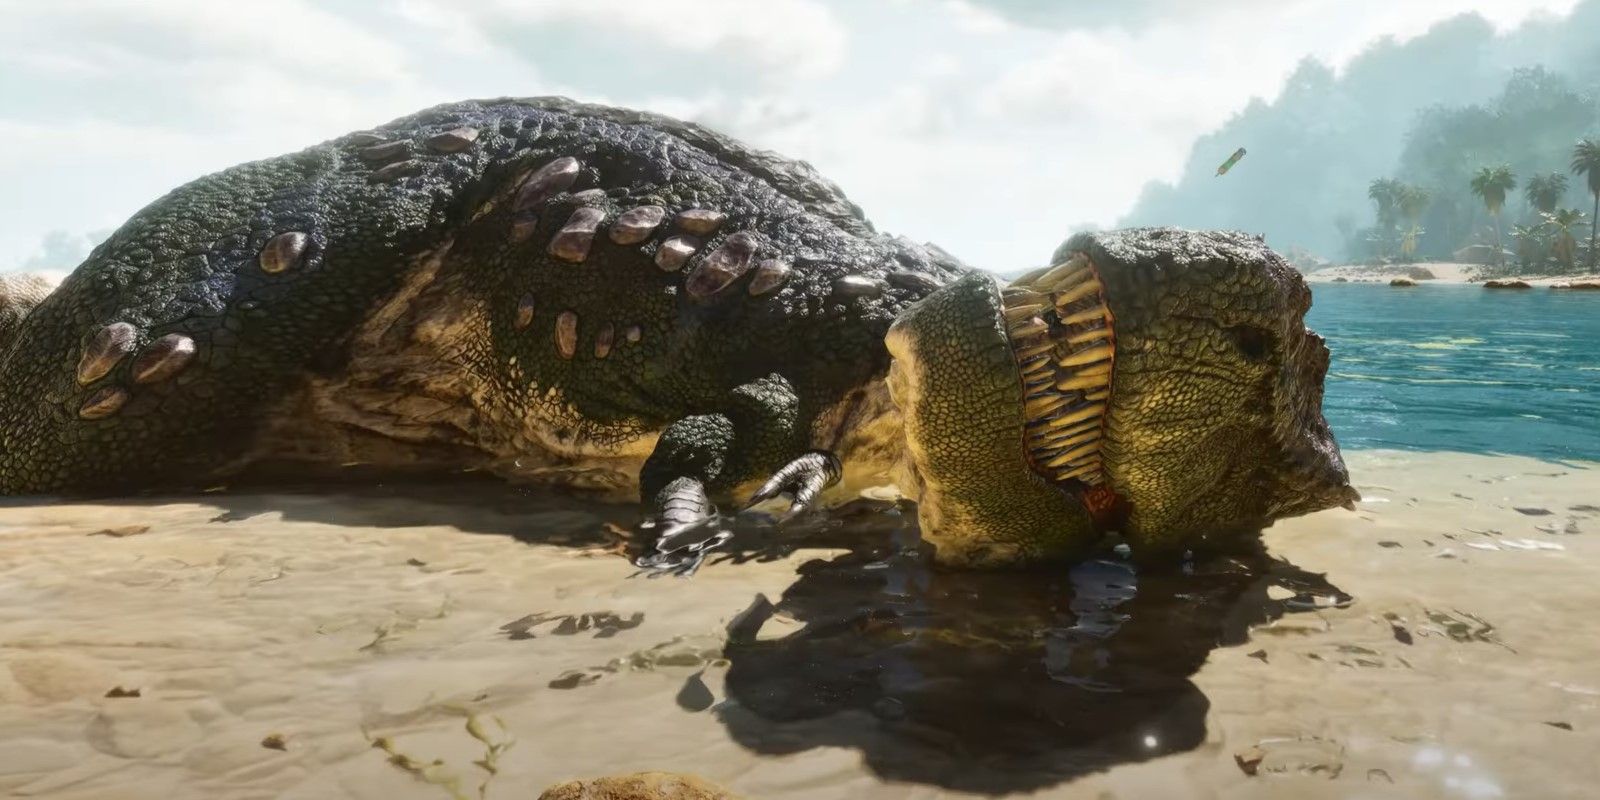 The Ark: Survival Ascended character found a low level T-rex to help with the mutations of the undesirable stats.